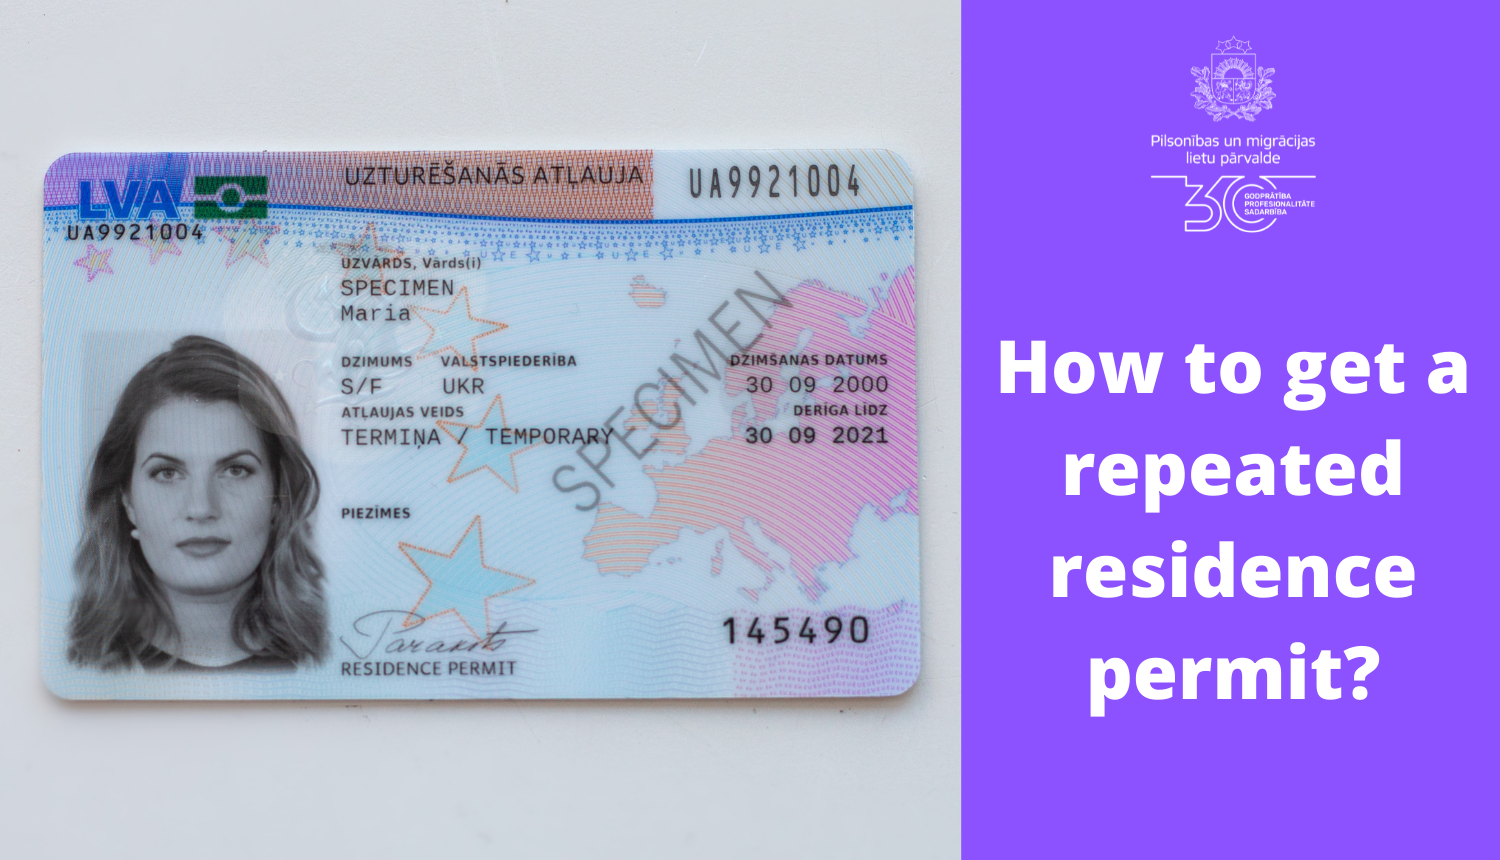 How to get a repeated residence permit?